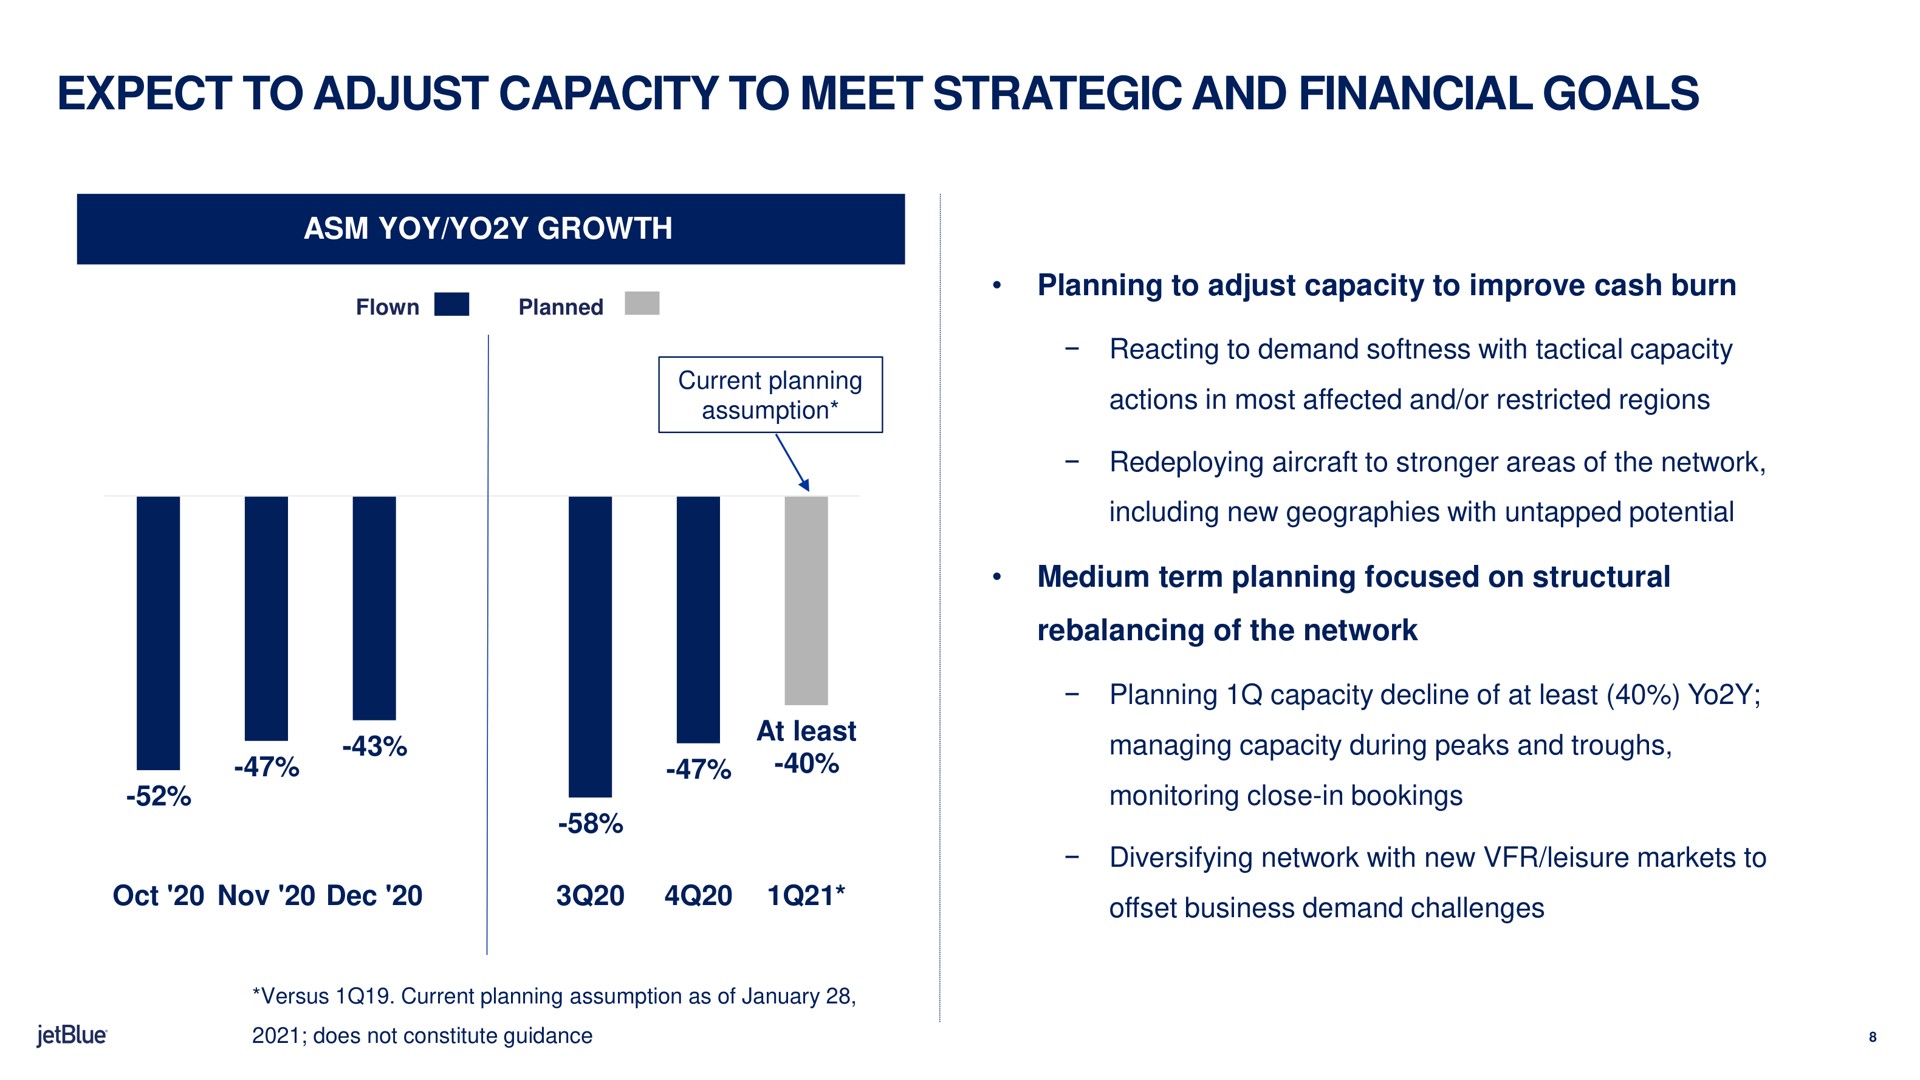 expect to adjust capacity to meet strategic and financial goals yoy growth planning to adjust capacity to improve cash burn medium term planning focused on structural of the network actions in most affected or restricted regions offset business demand challenges | jetBlue